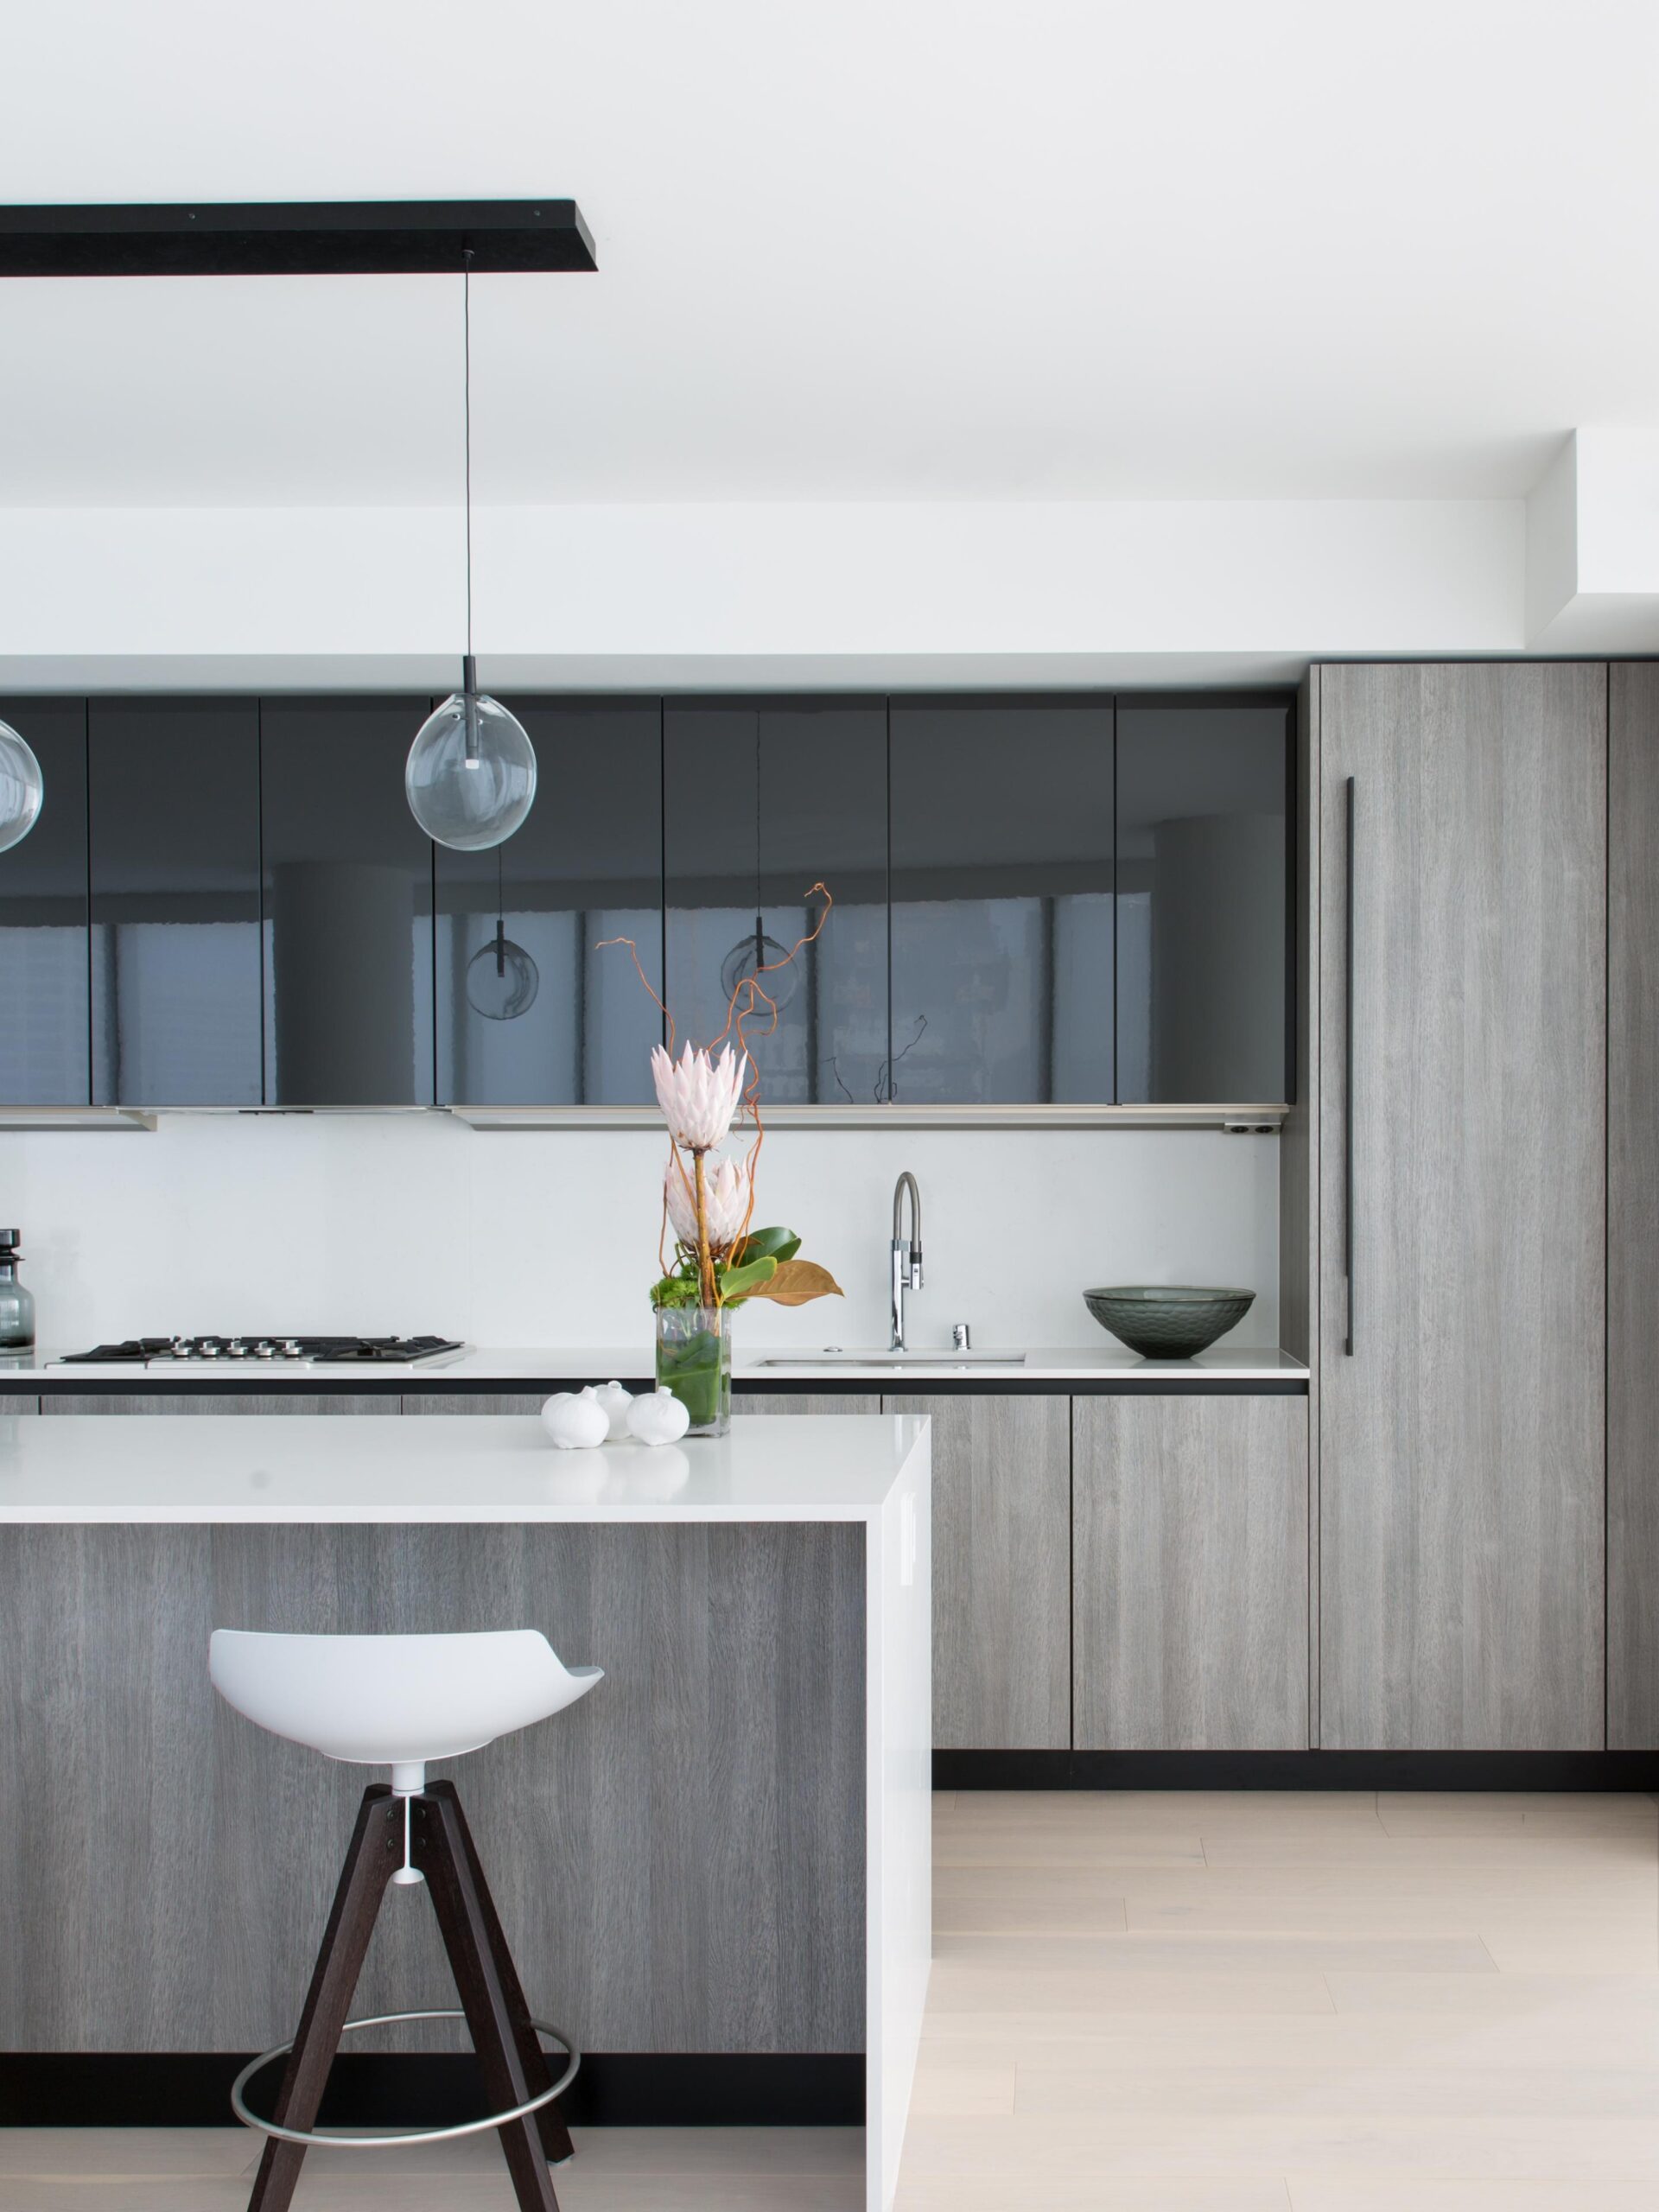 4 Sophisticated Gray Kitchen Ideas - Chic Gray Kitchens